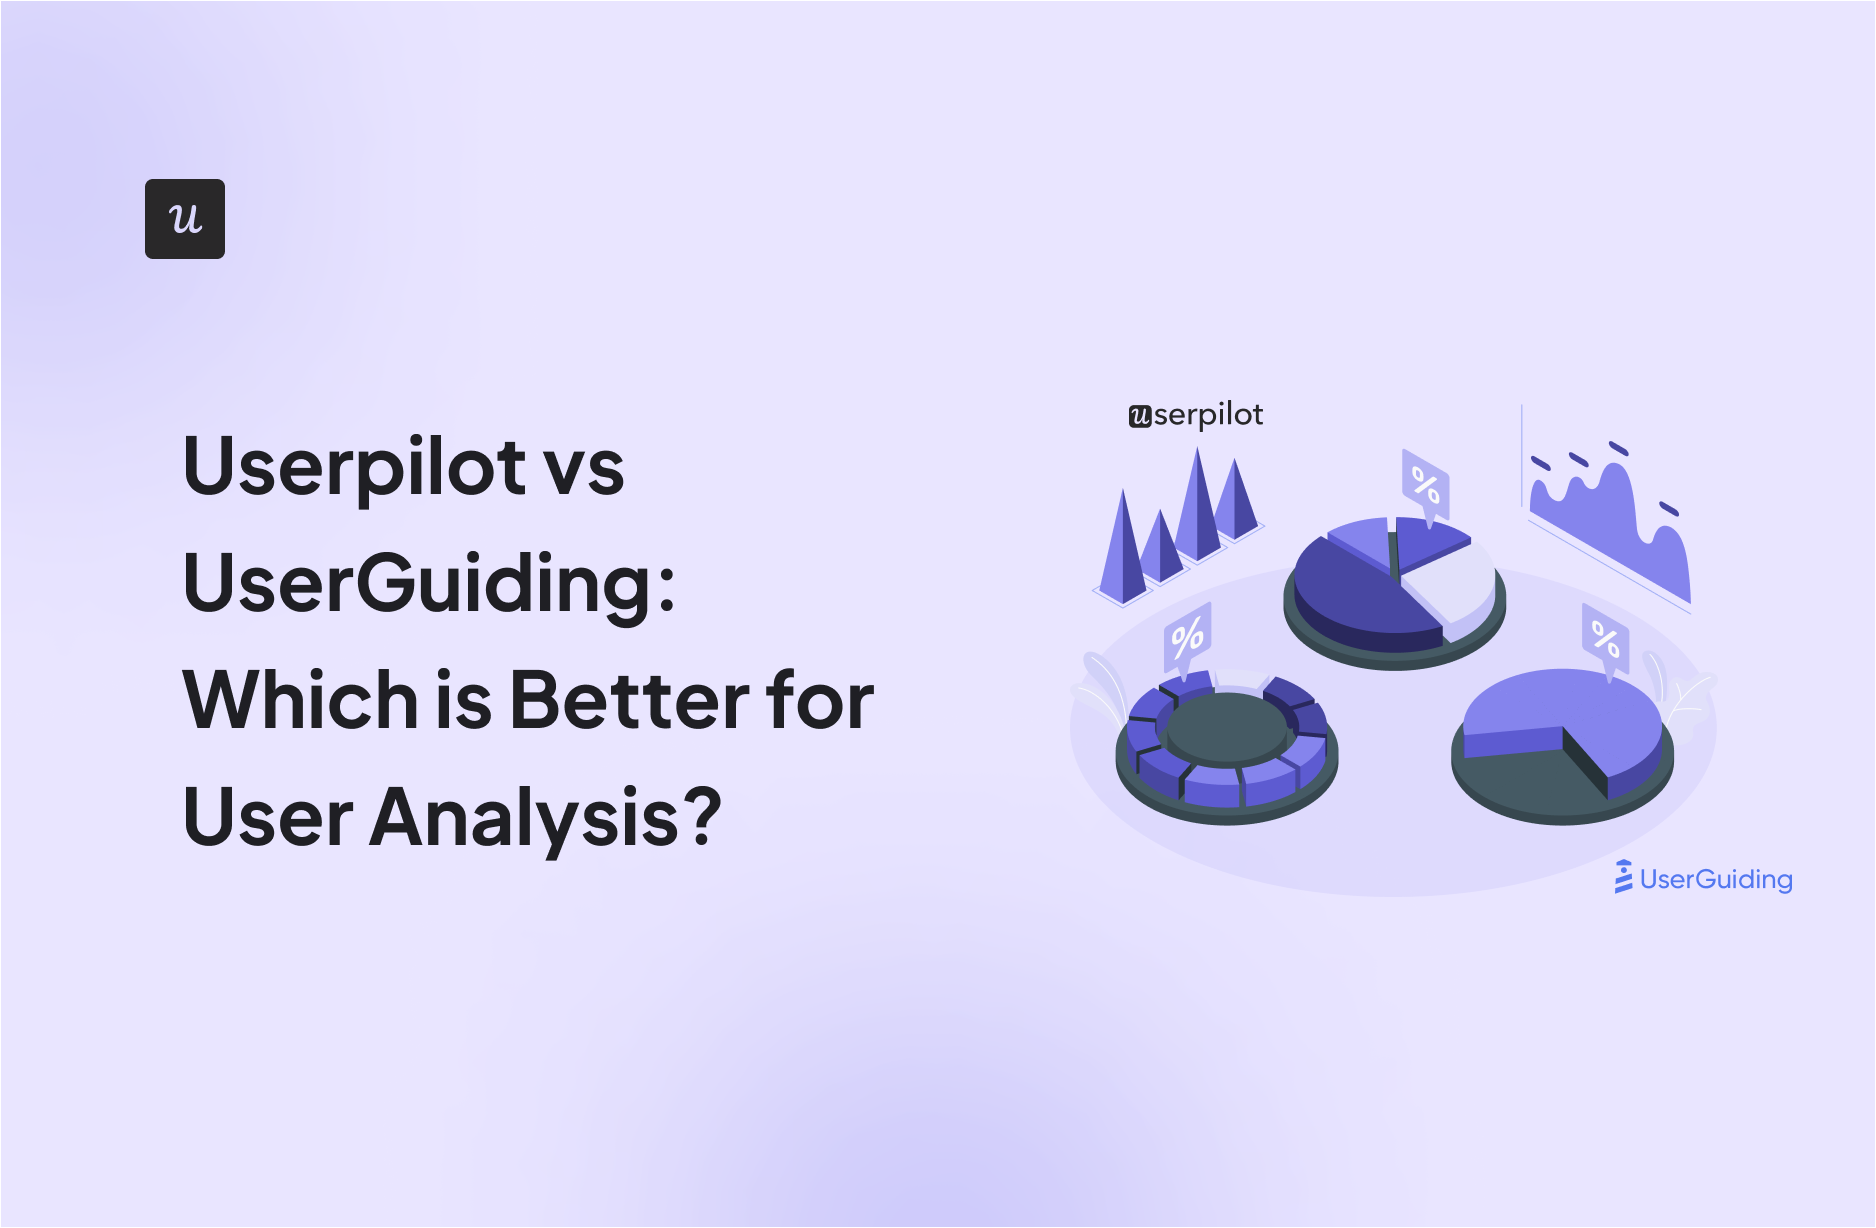 Userpilot vs UserGuiding: Which is Better for User Analysis?